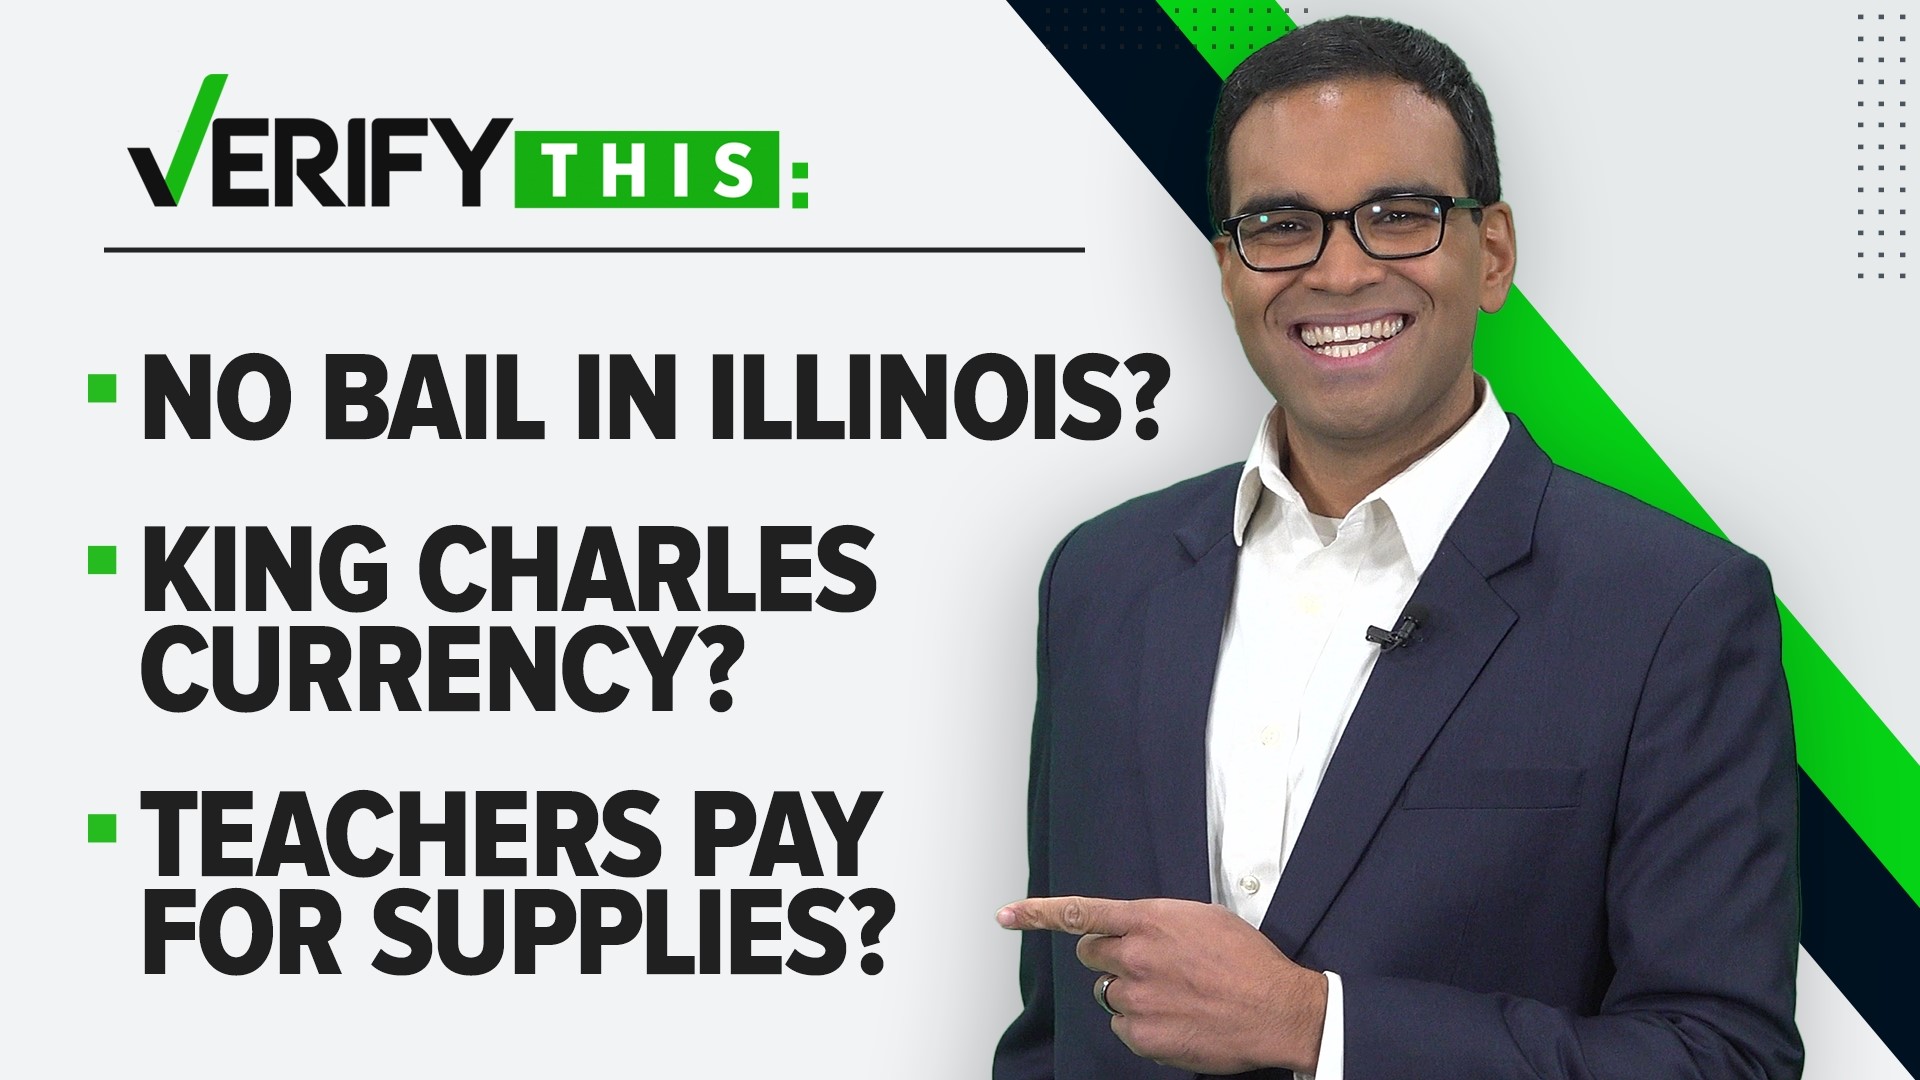 Bringing you just the facts on King Charles currency, bail in Illinois, Omicron vaccine testing, Medicare ads and teachers paying for school supplies.